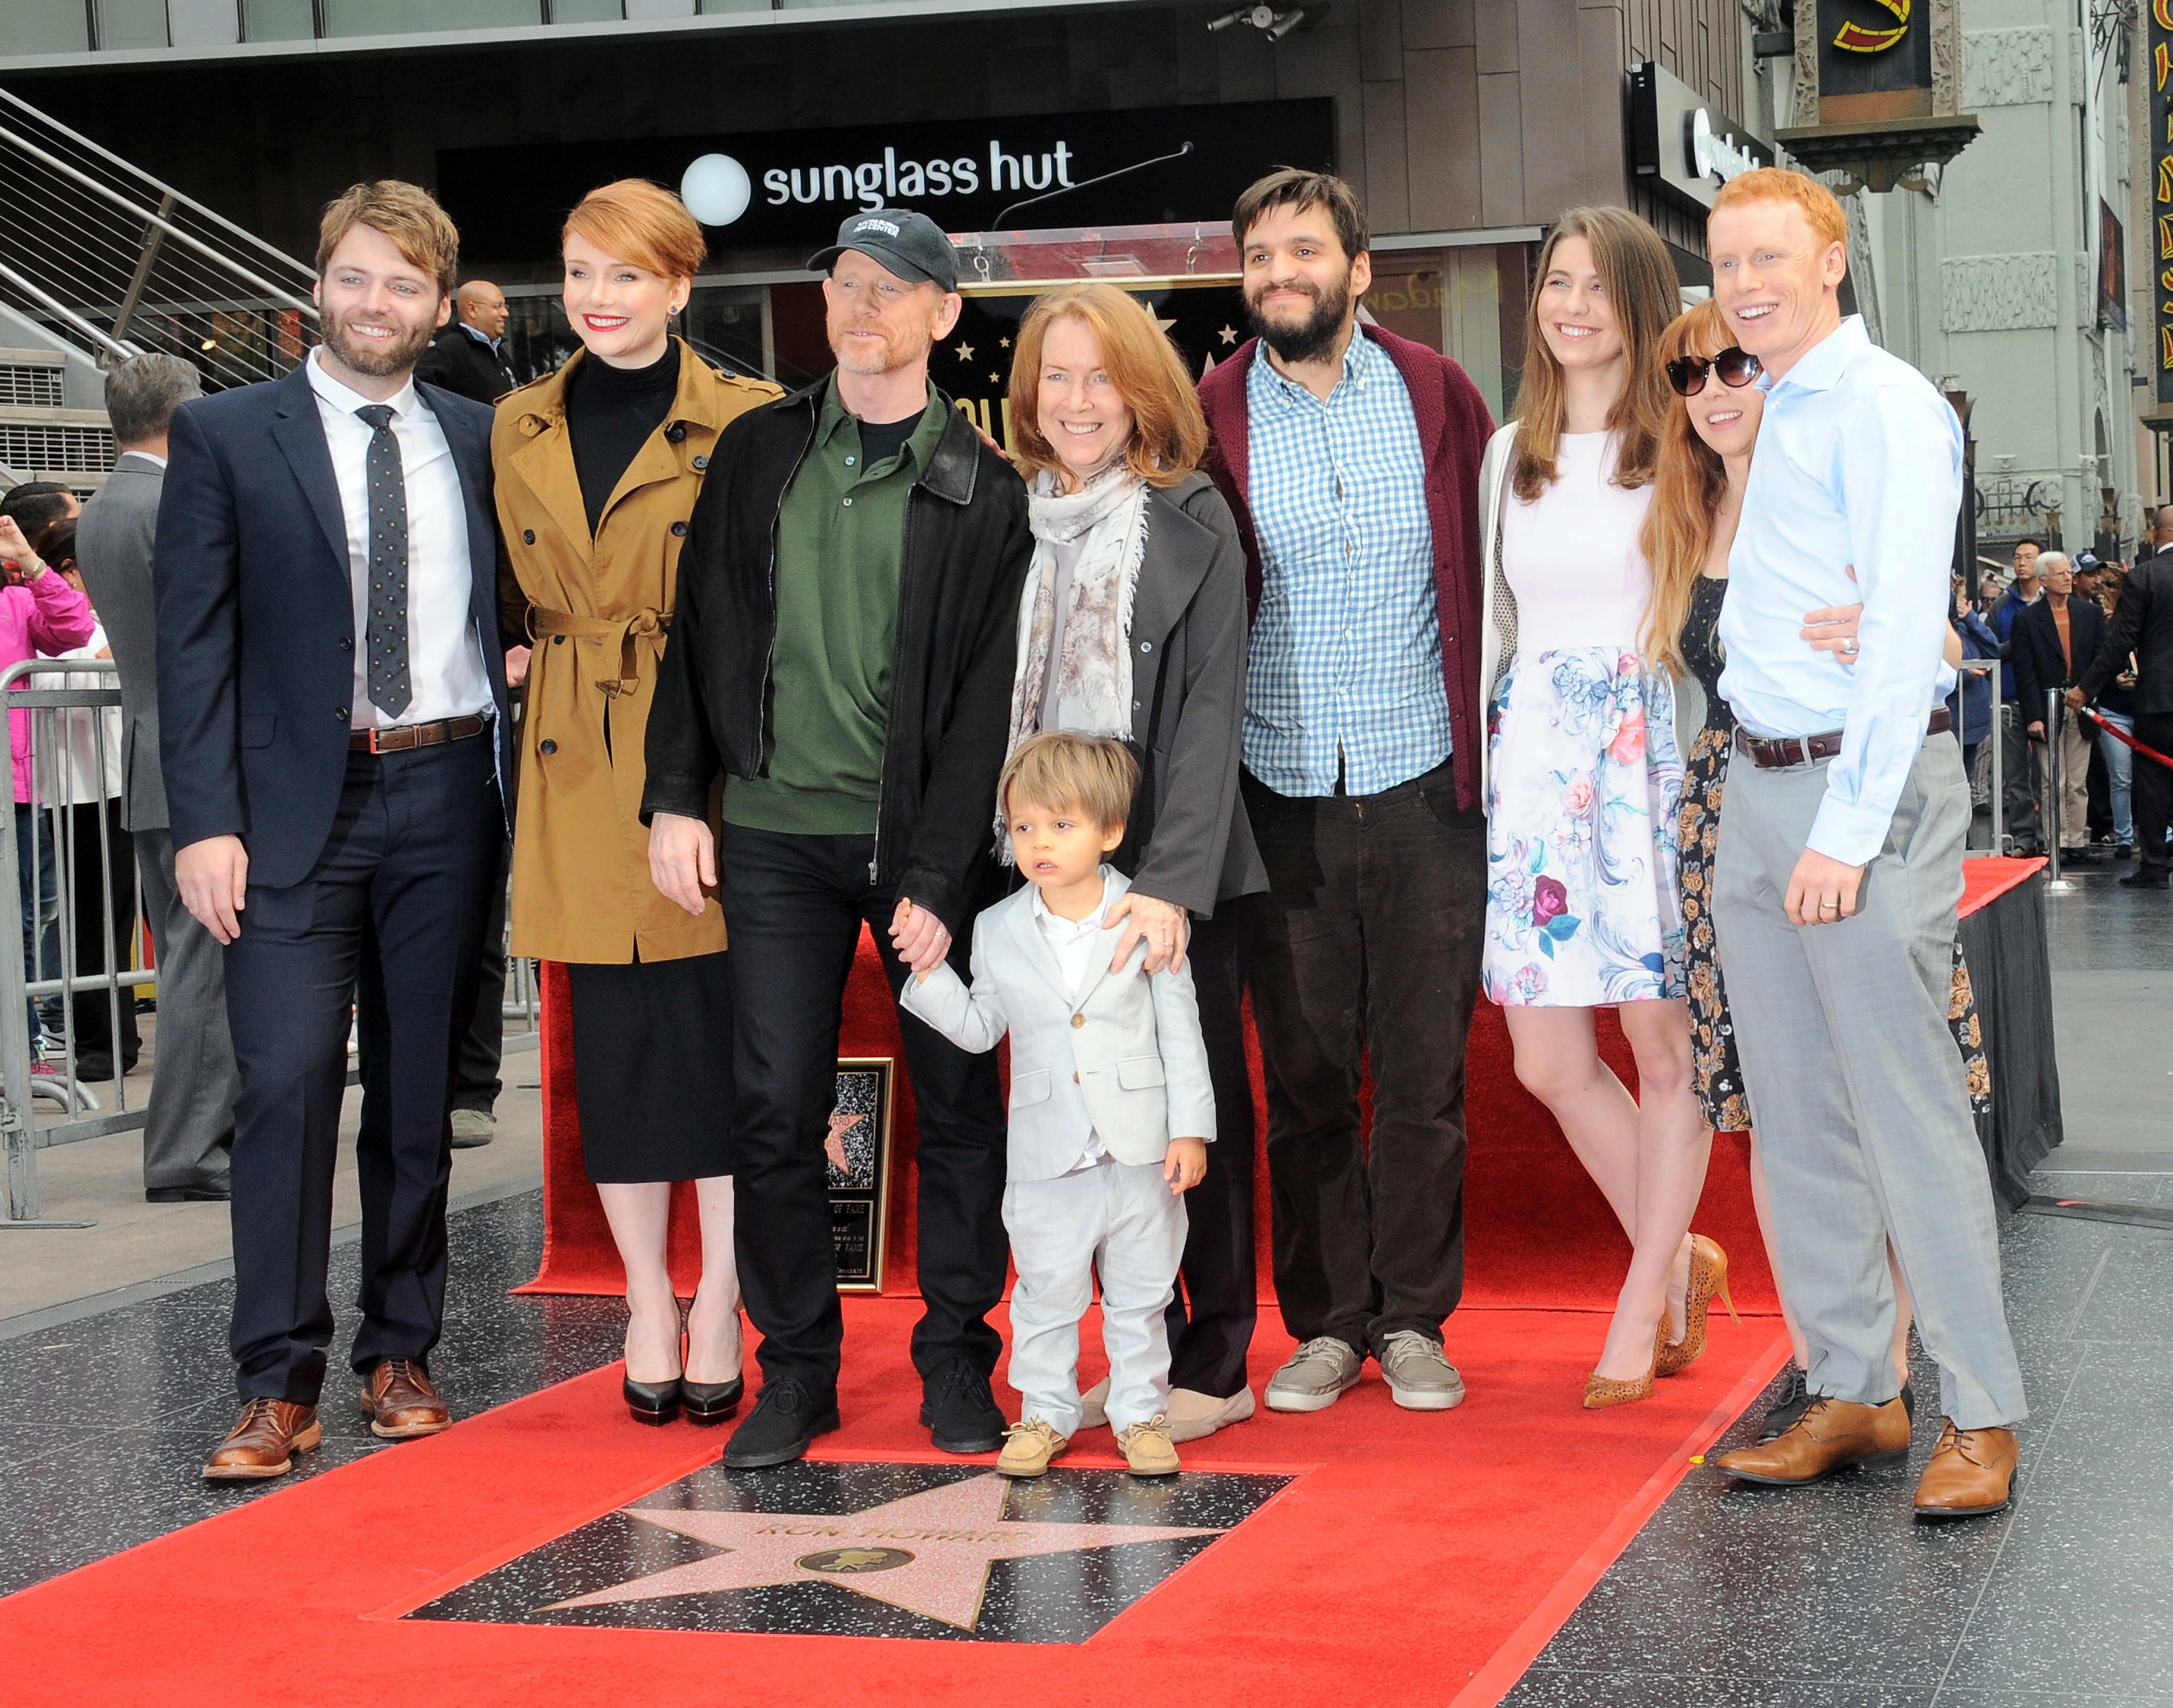 Seth Gabel, Bryce Dallas Howard, Ron Howard, Cheryl Howard and other family members at the Ron Howard Star ceremony on The Hollywood Walk of Fame held in Hollywood, California, on December 10, 2015. | Source: Getty Images